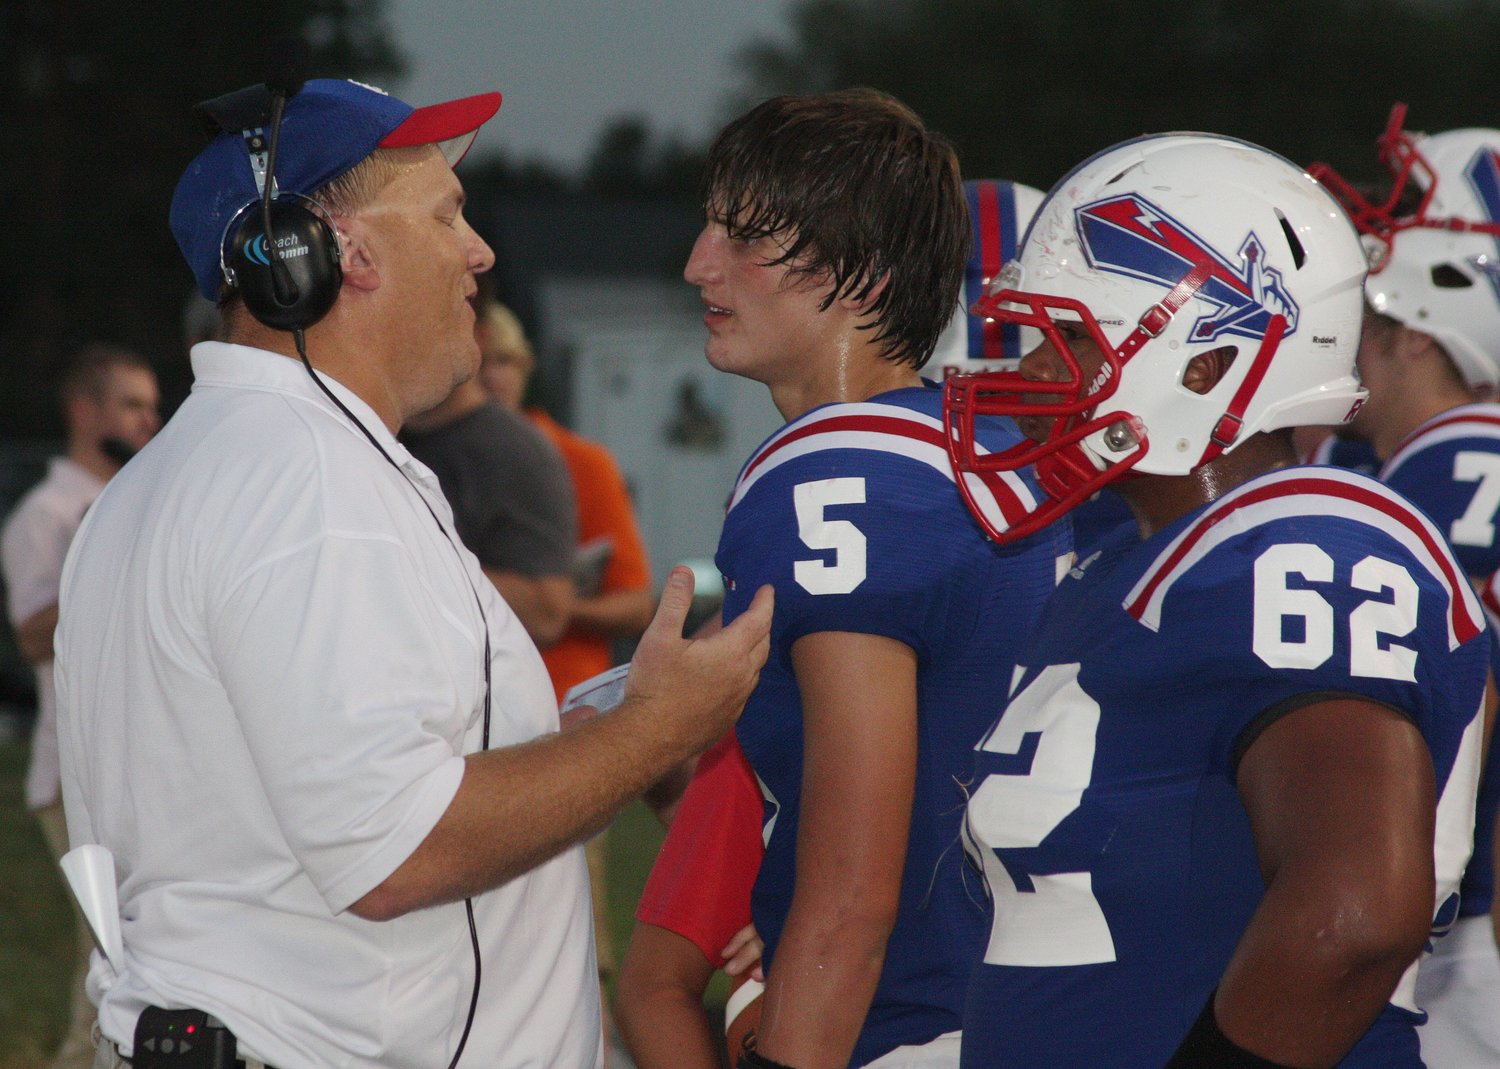 While serving as Spartans football offensive coordinator, Sam Richardson is shown giving advice to Moberly quarterback Ben Stoecklein during an Aug. 26, 2011 home game. Sam, 53, passed away July 31, 2021.